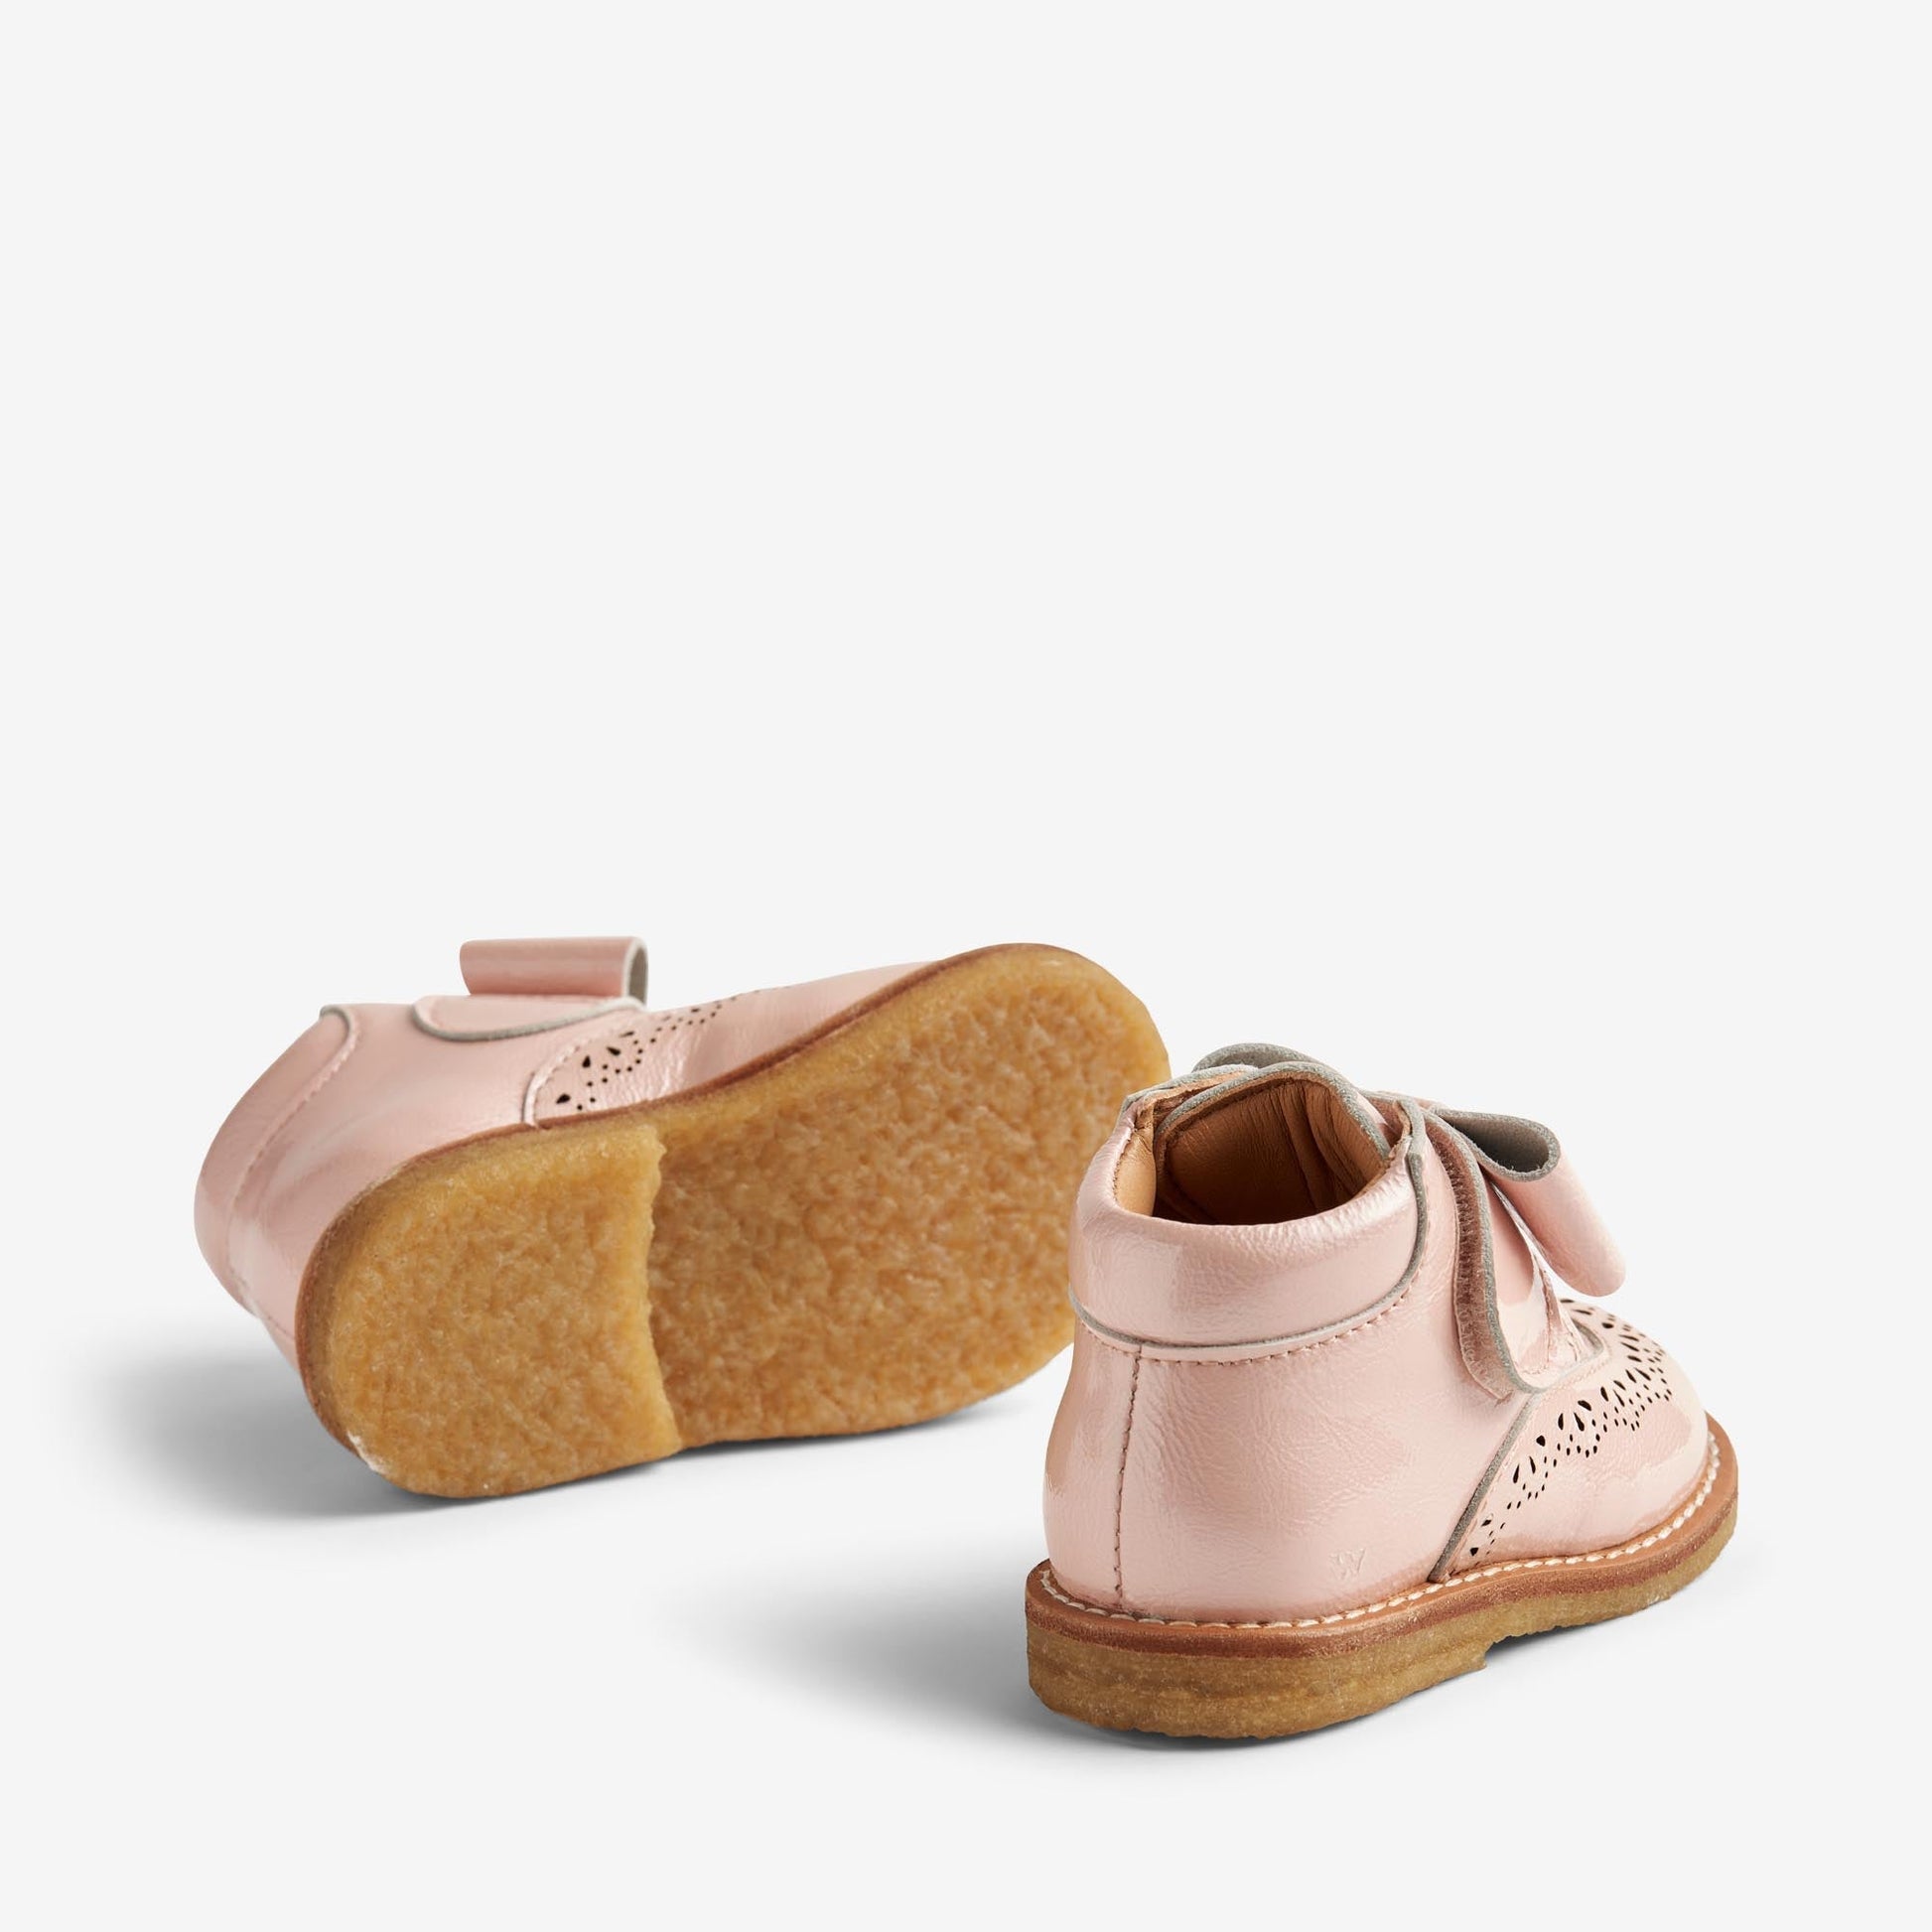 Wheat 'Bowy' Velcro Baby Bootie - Rose Ballet